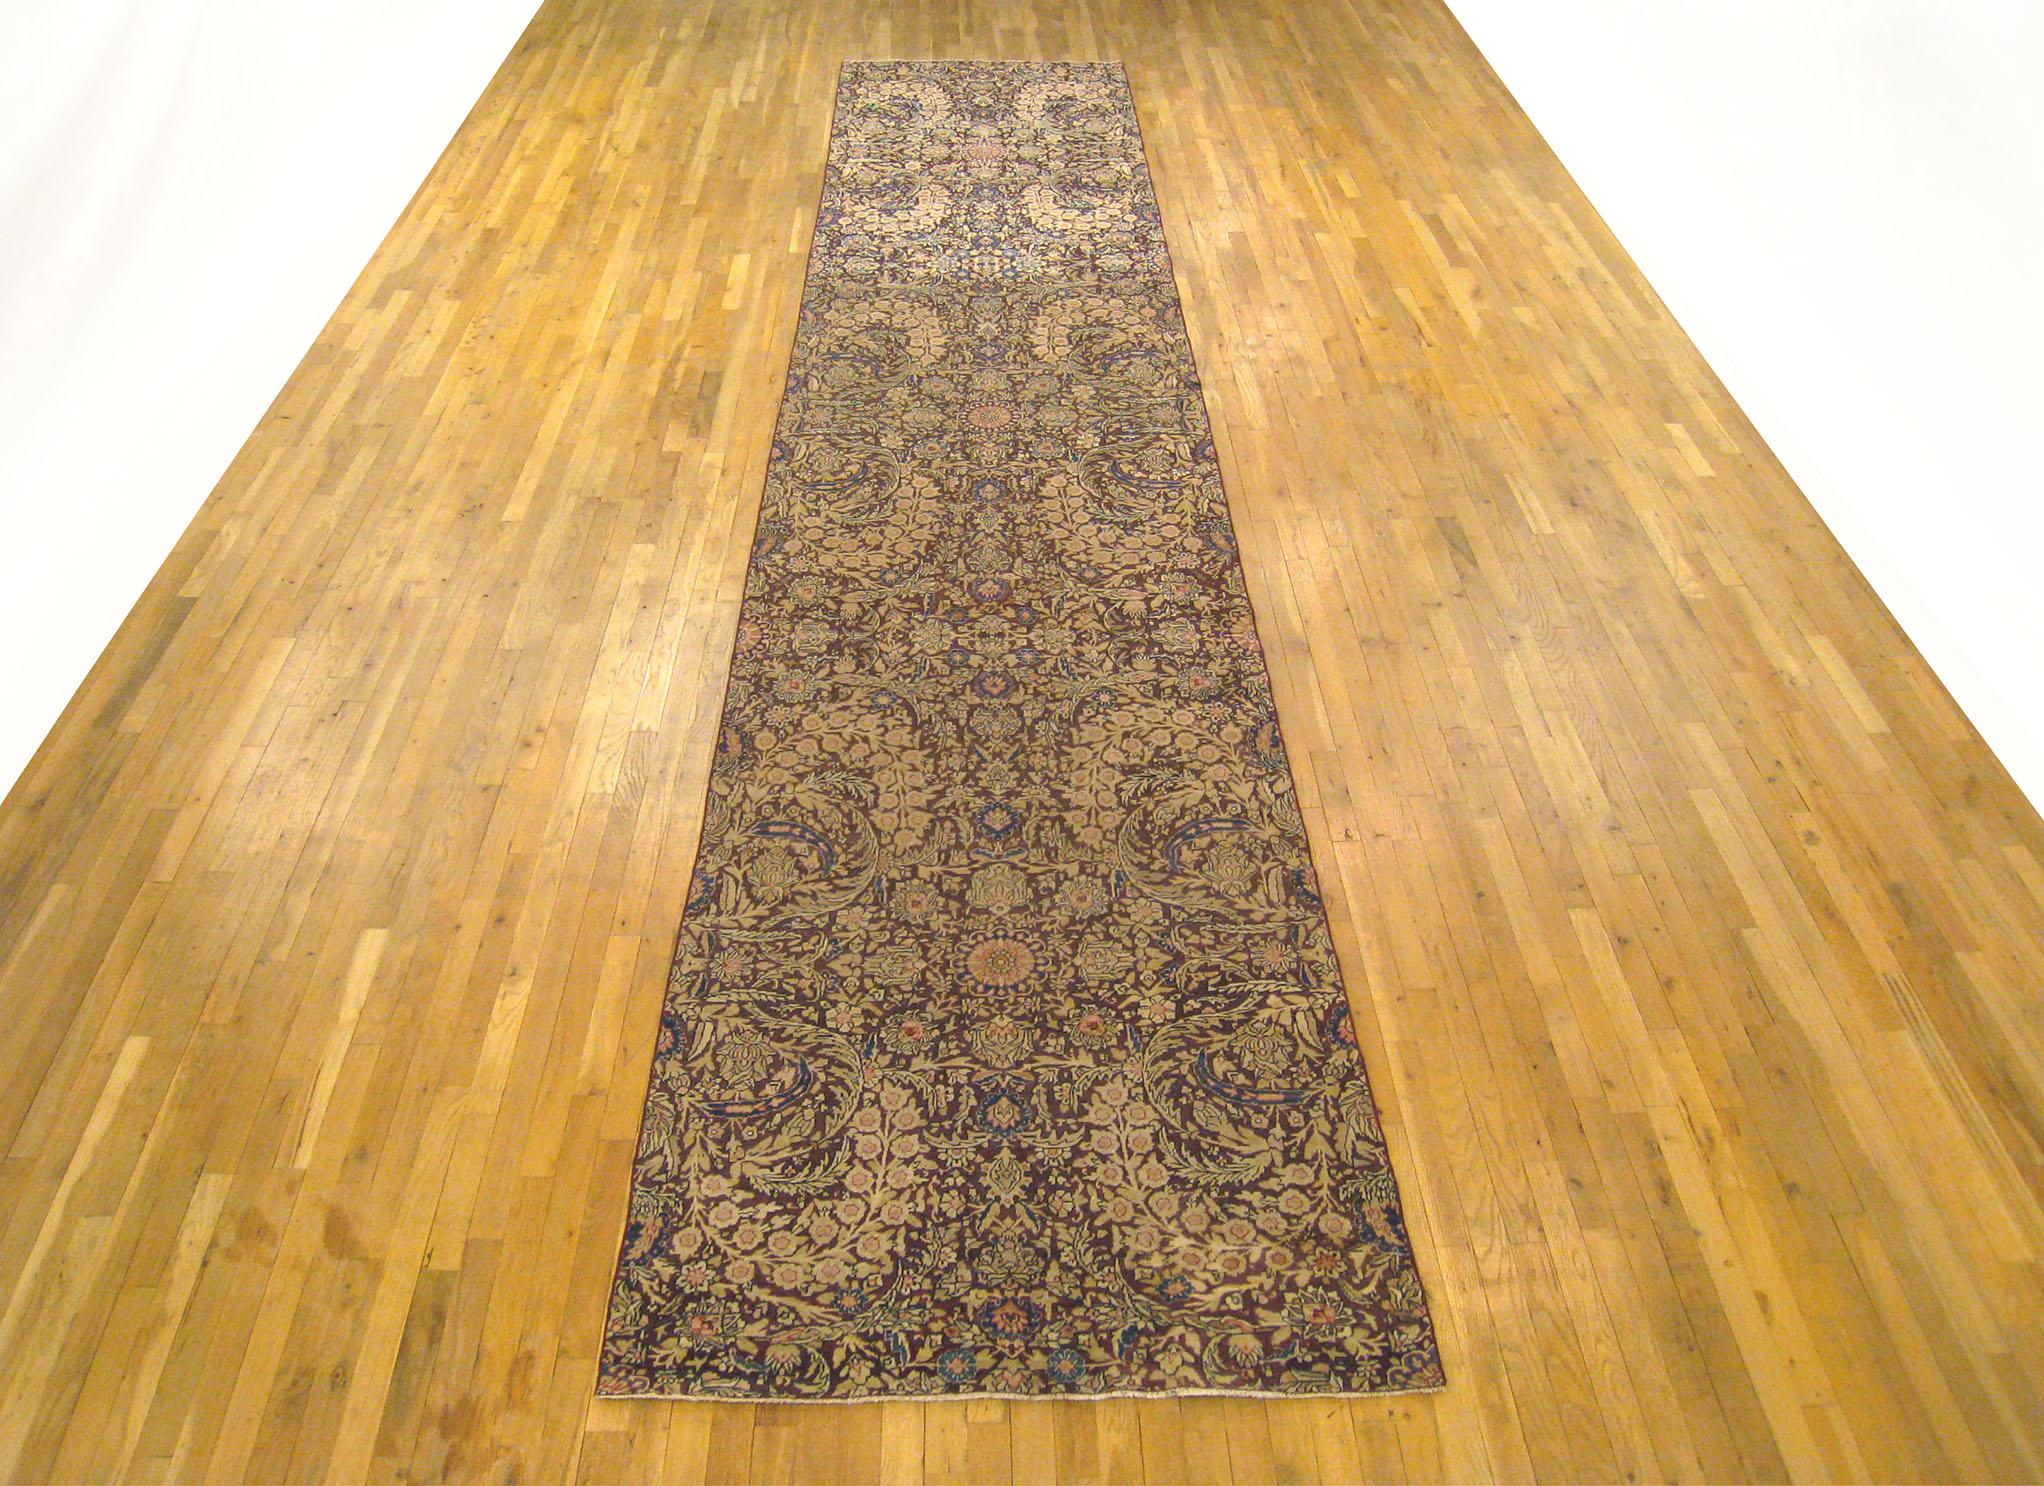 An antique Persian Lavar Oriental rug in runner size, circa 1870, size 19'0 x 3'9. This lovely hand knotted carpet features a dazzling floral design in the ivory central field, alternating between small scale and large scale floral elements. The